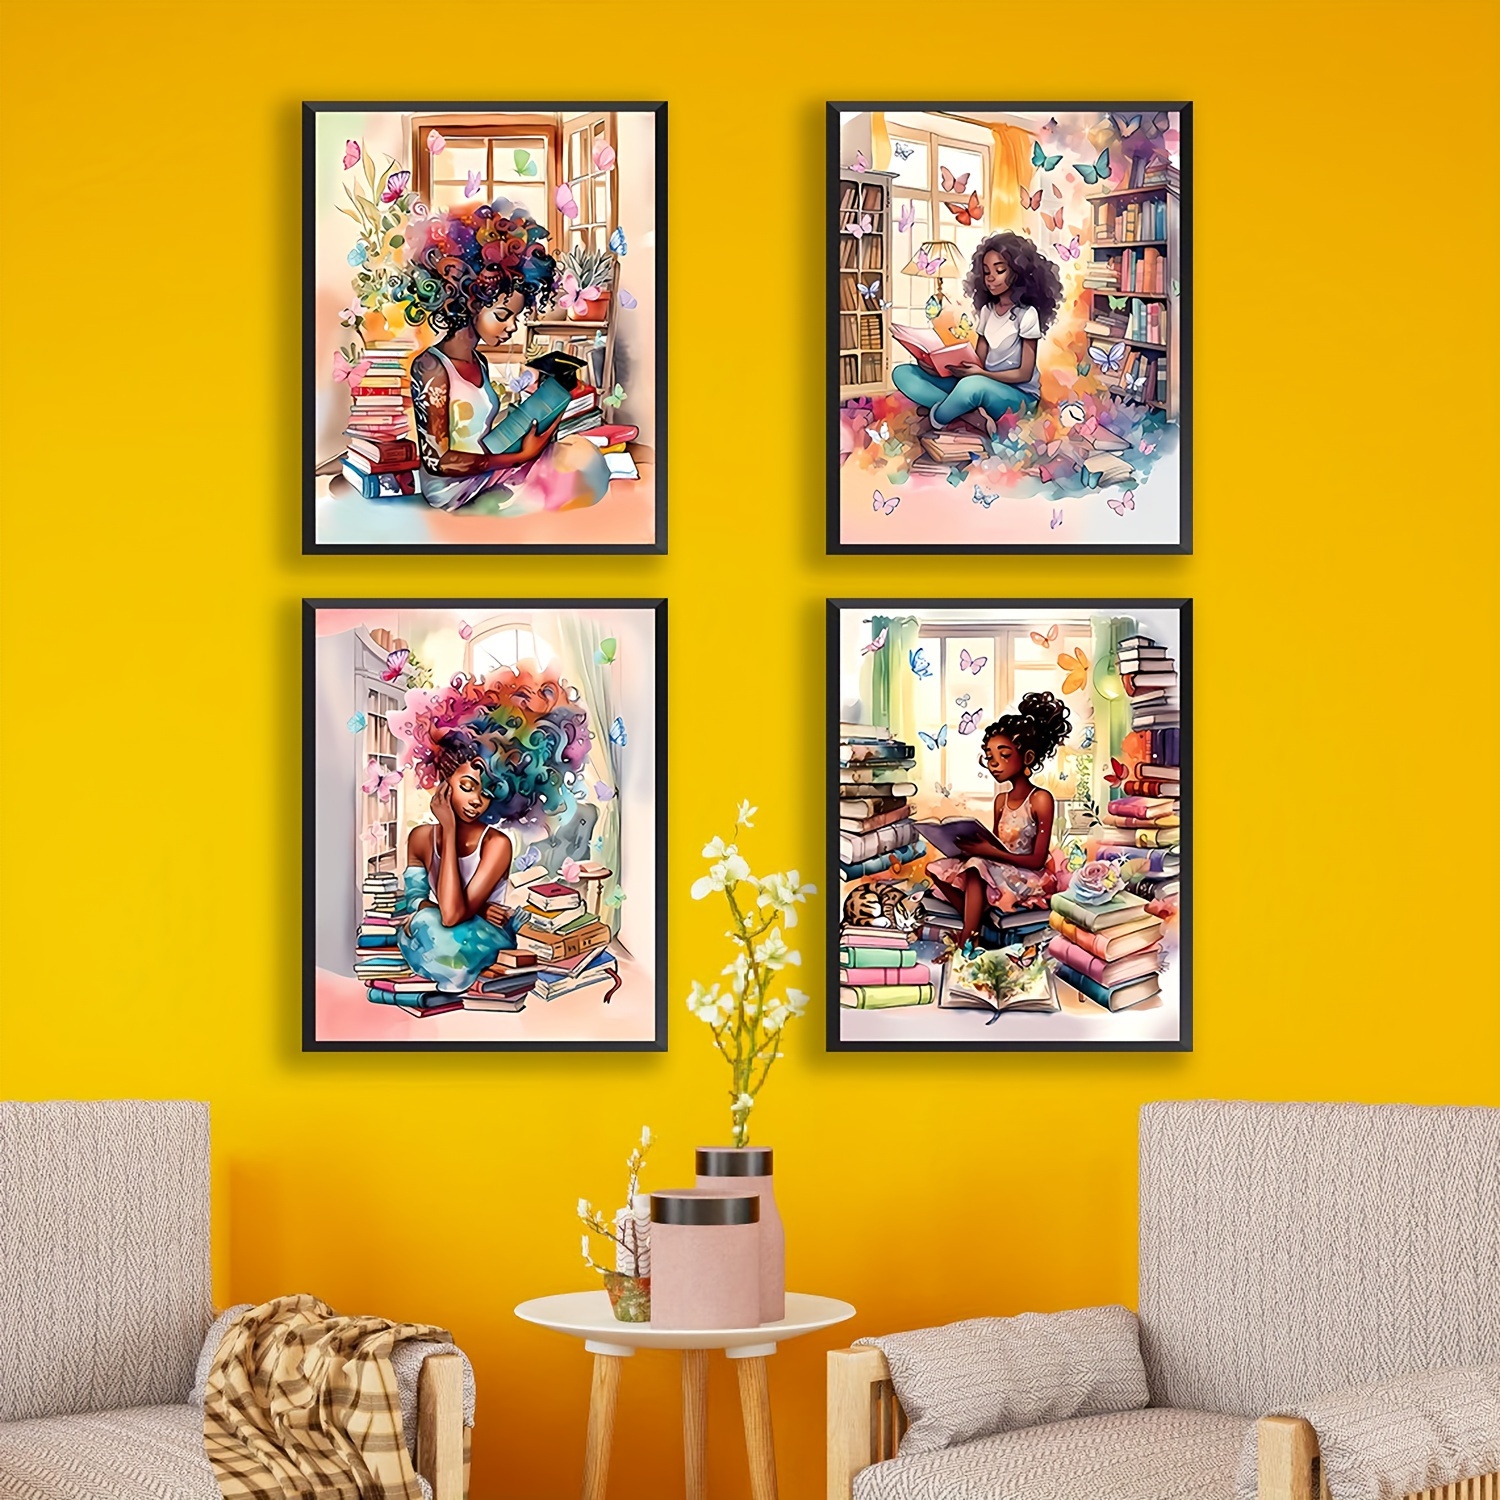 Outus 9 Pieces Black Girl Wall Painting Art Decor Motivational Posters for  Girls Bedroom, Art Paint for Kids Teen Wall Decorations,Unframed, 8 x 10